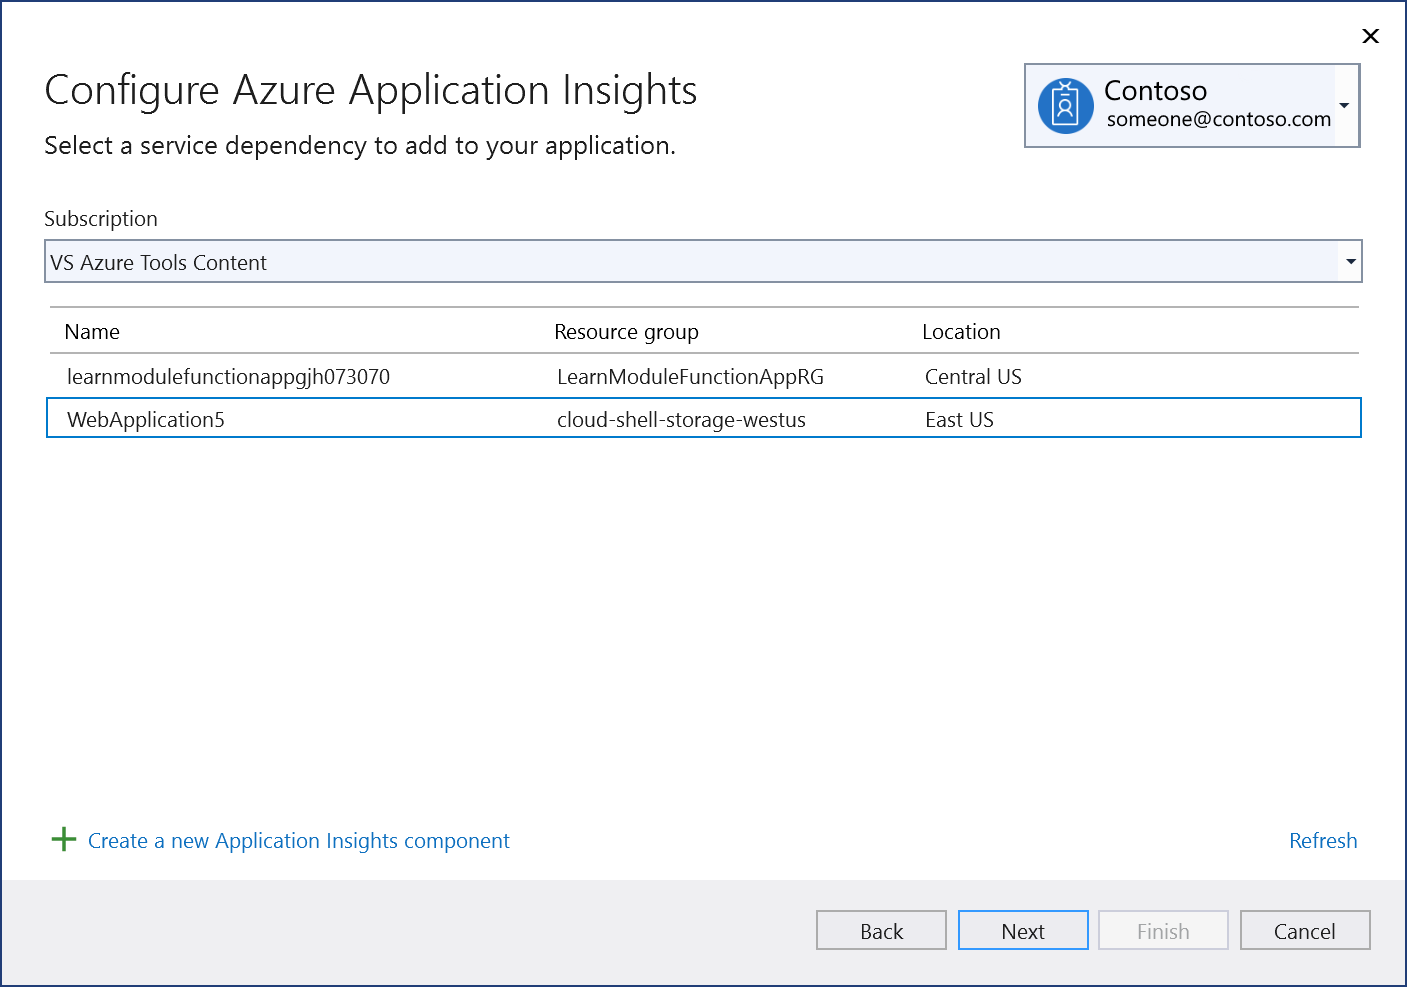 Screenshot showing "Connect to existing Application Insights component" screen.